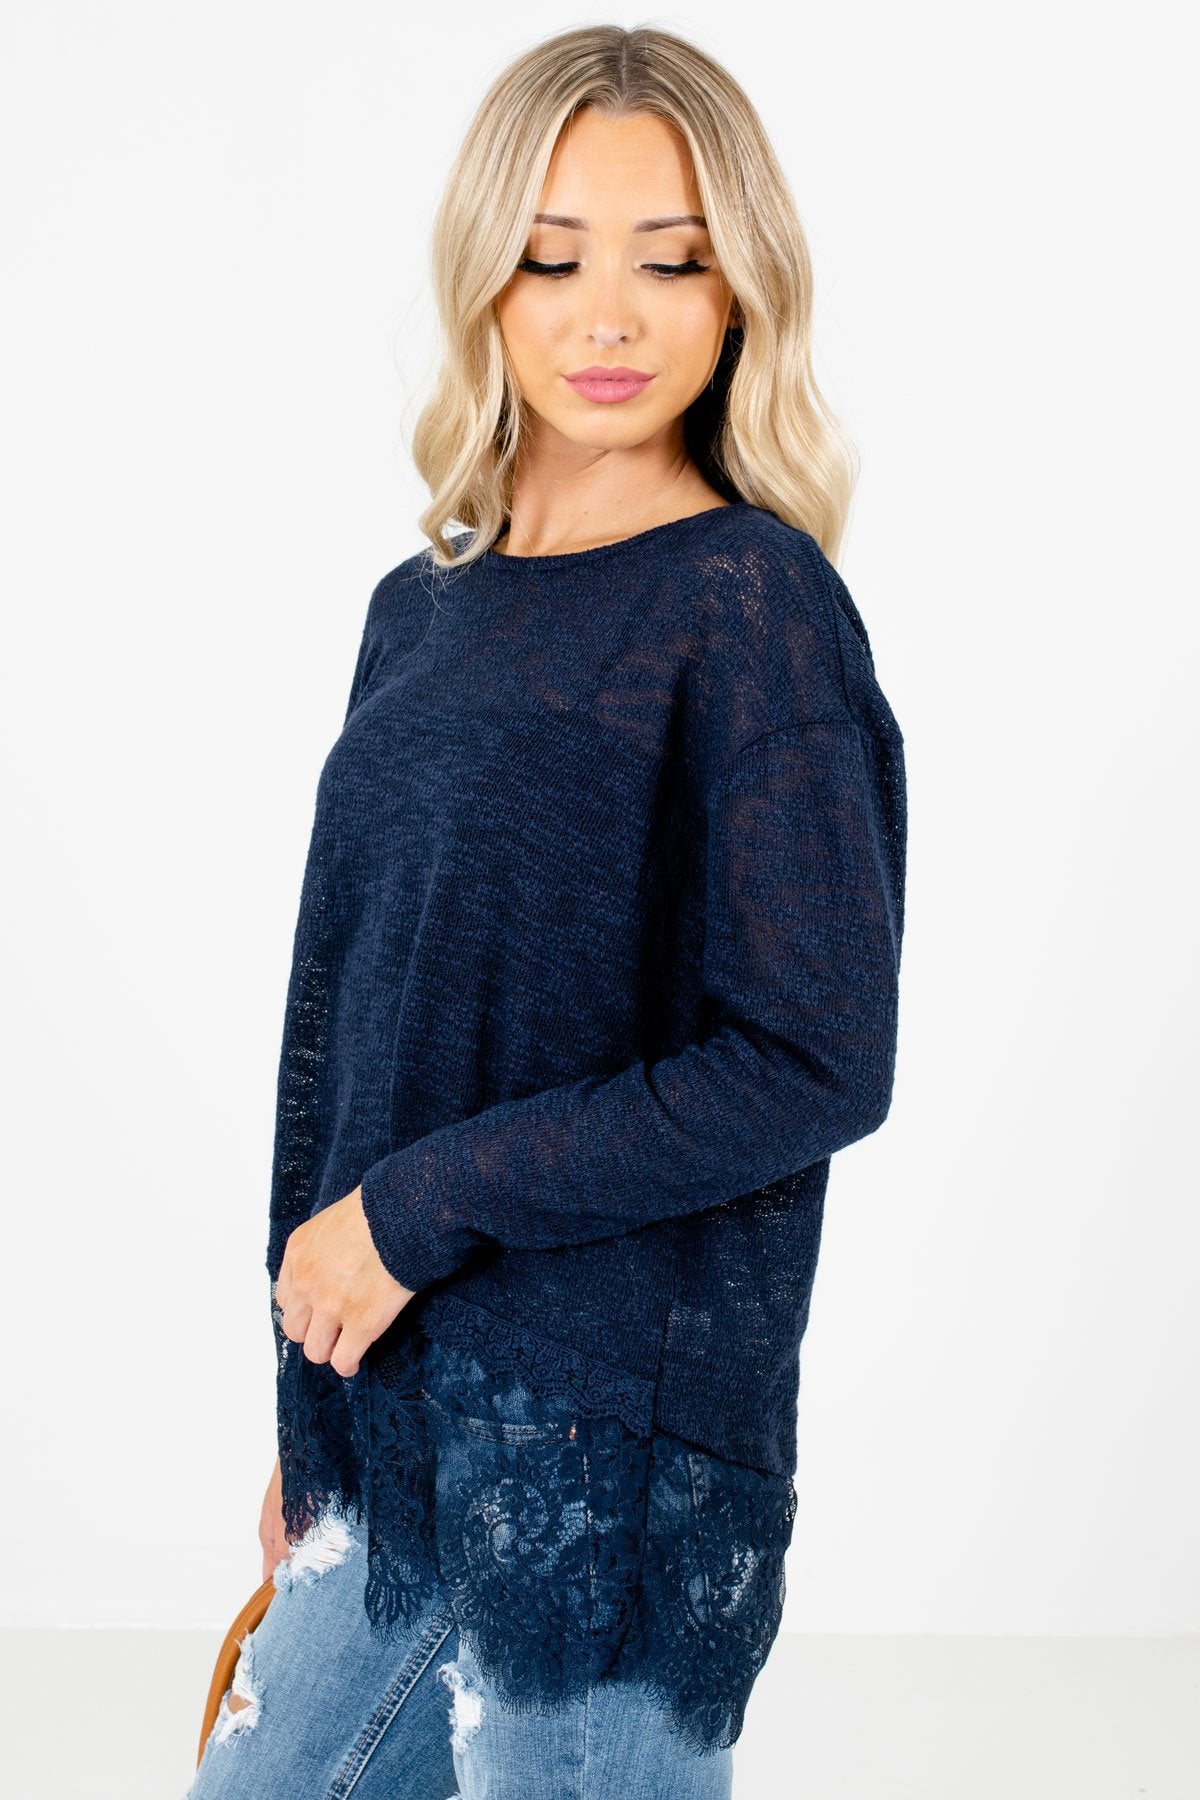 Blue Long Sleeve Boutique Tops for Women